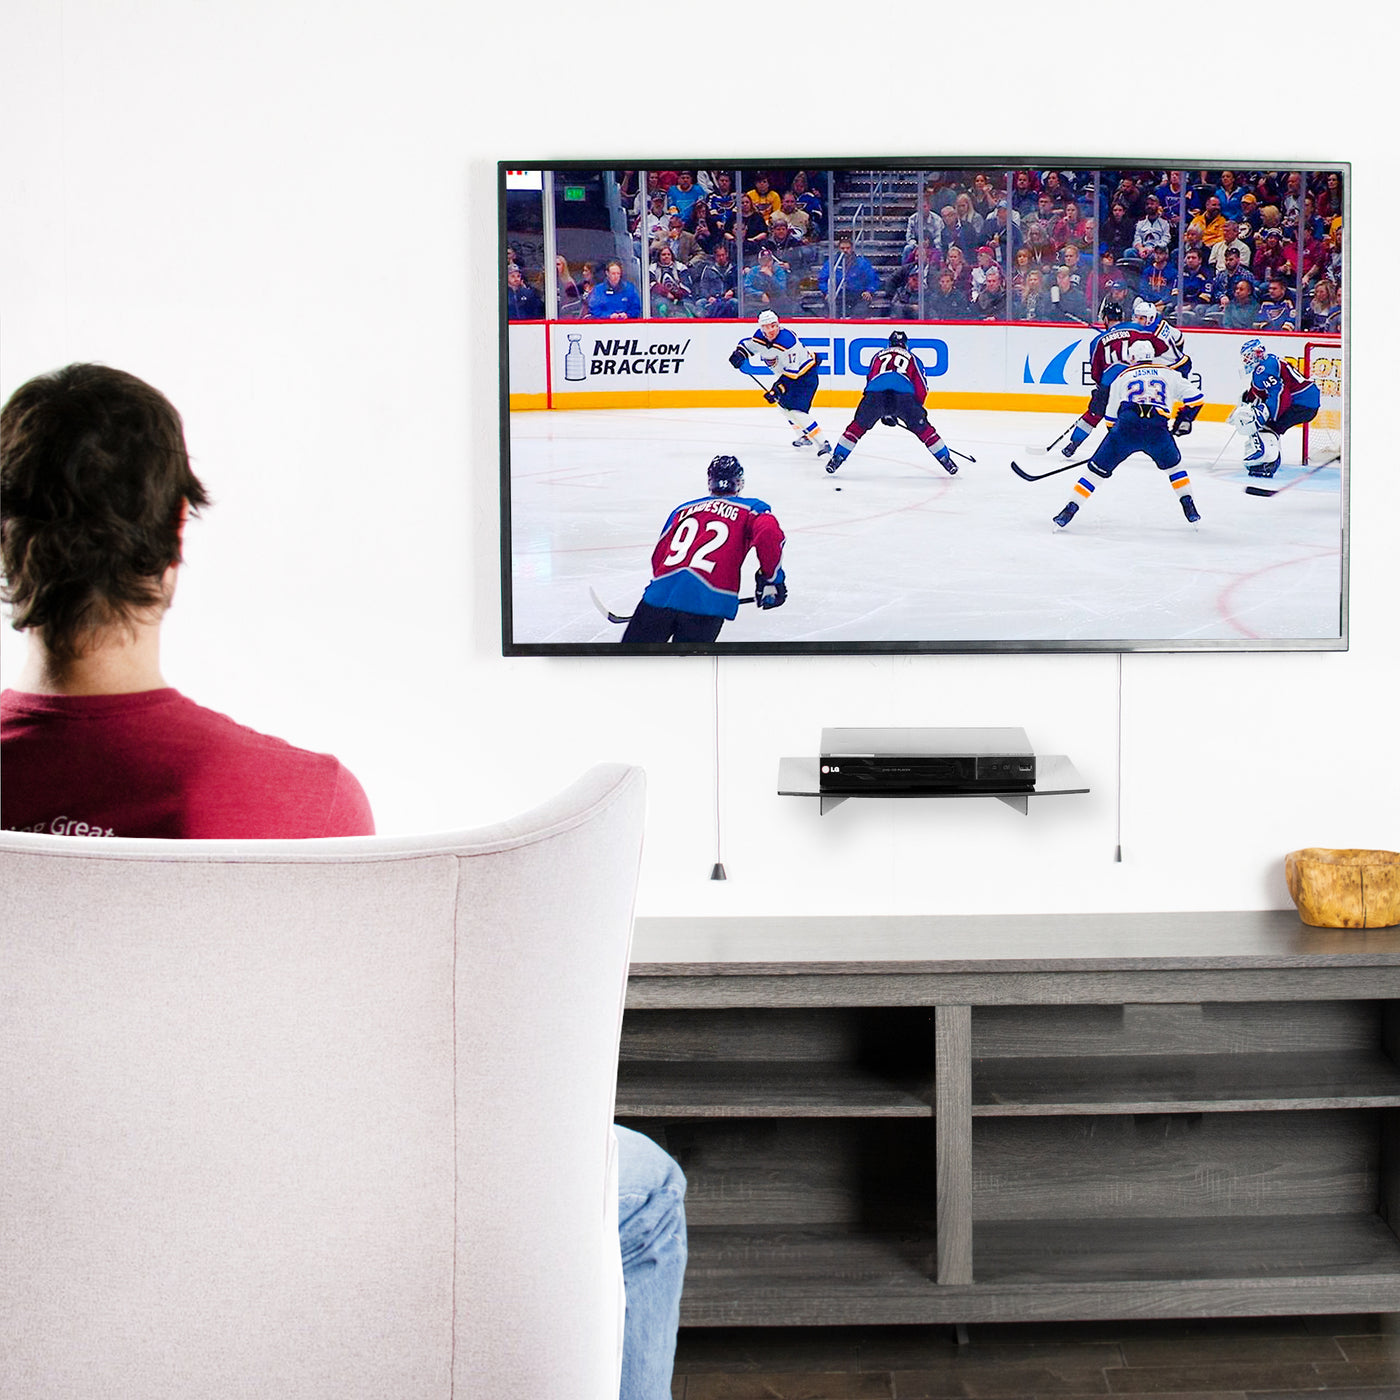 A man watching a hockey game with a floating shelf supporting an LG TV.